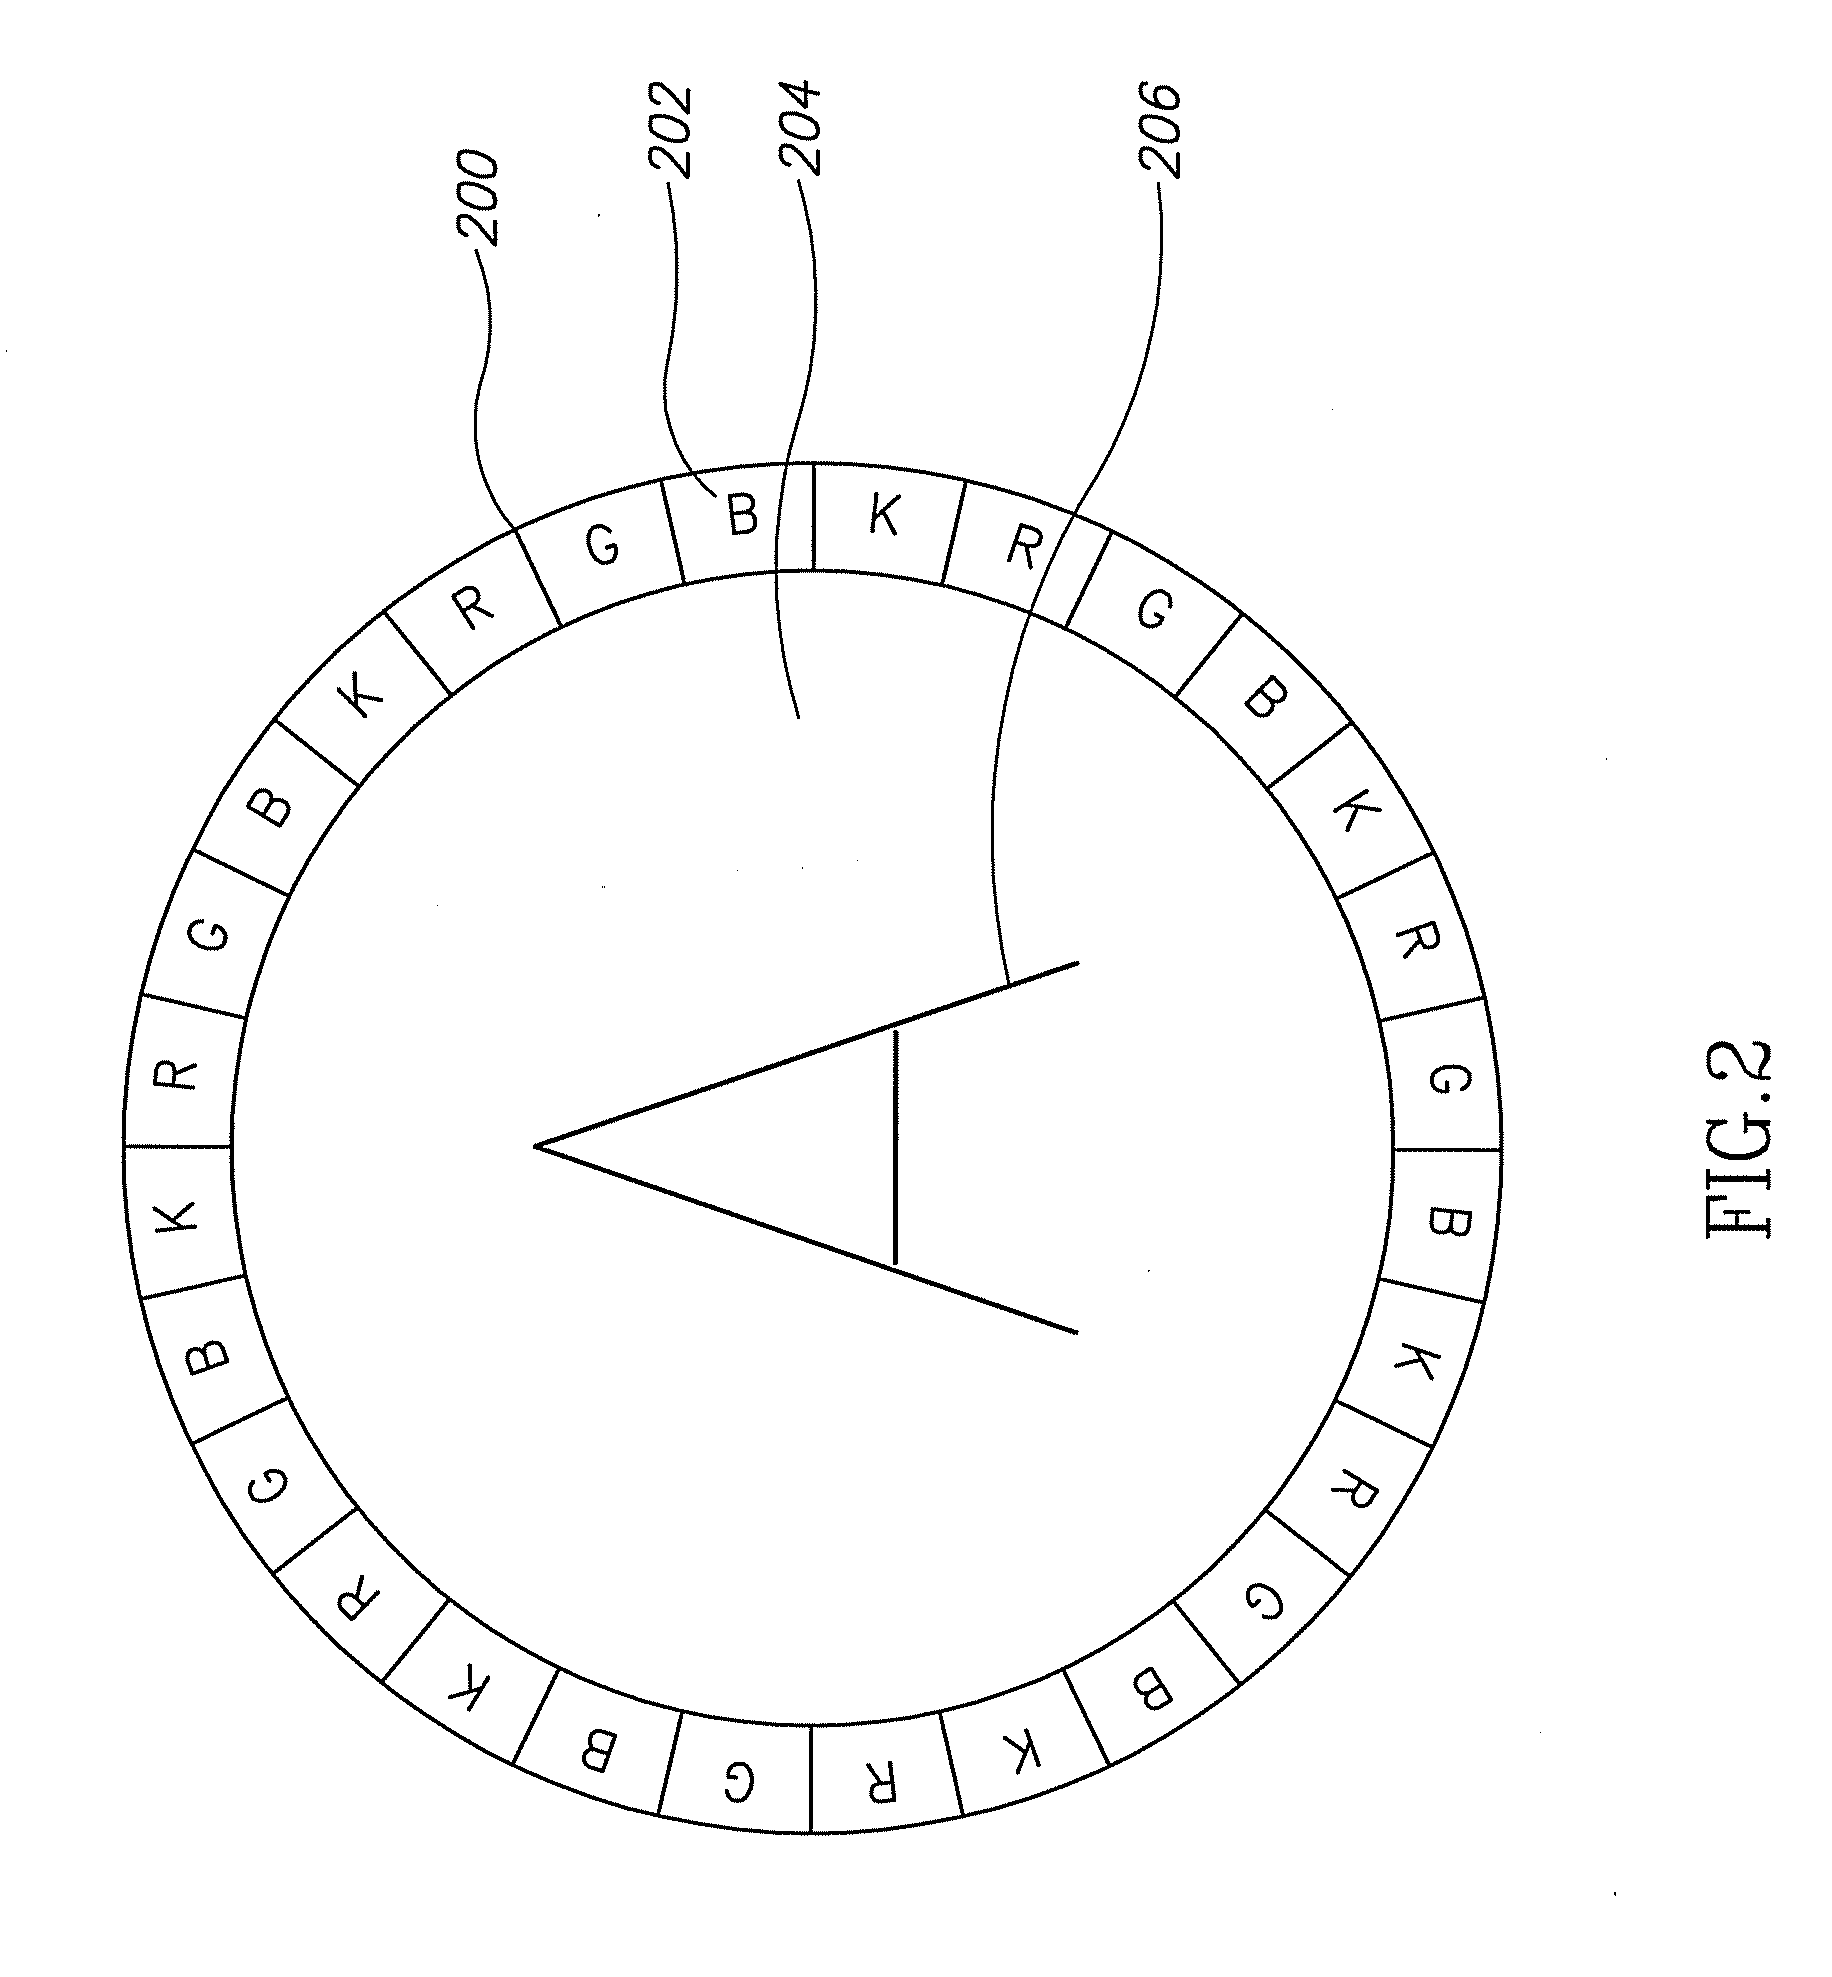 Device and method for identification of objects using color coding